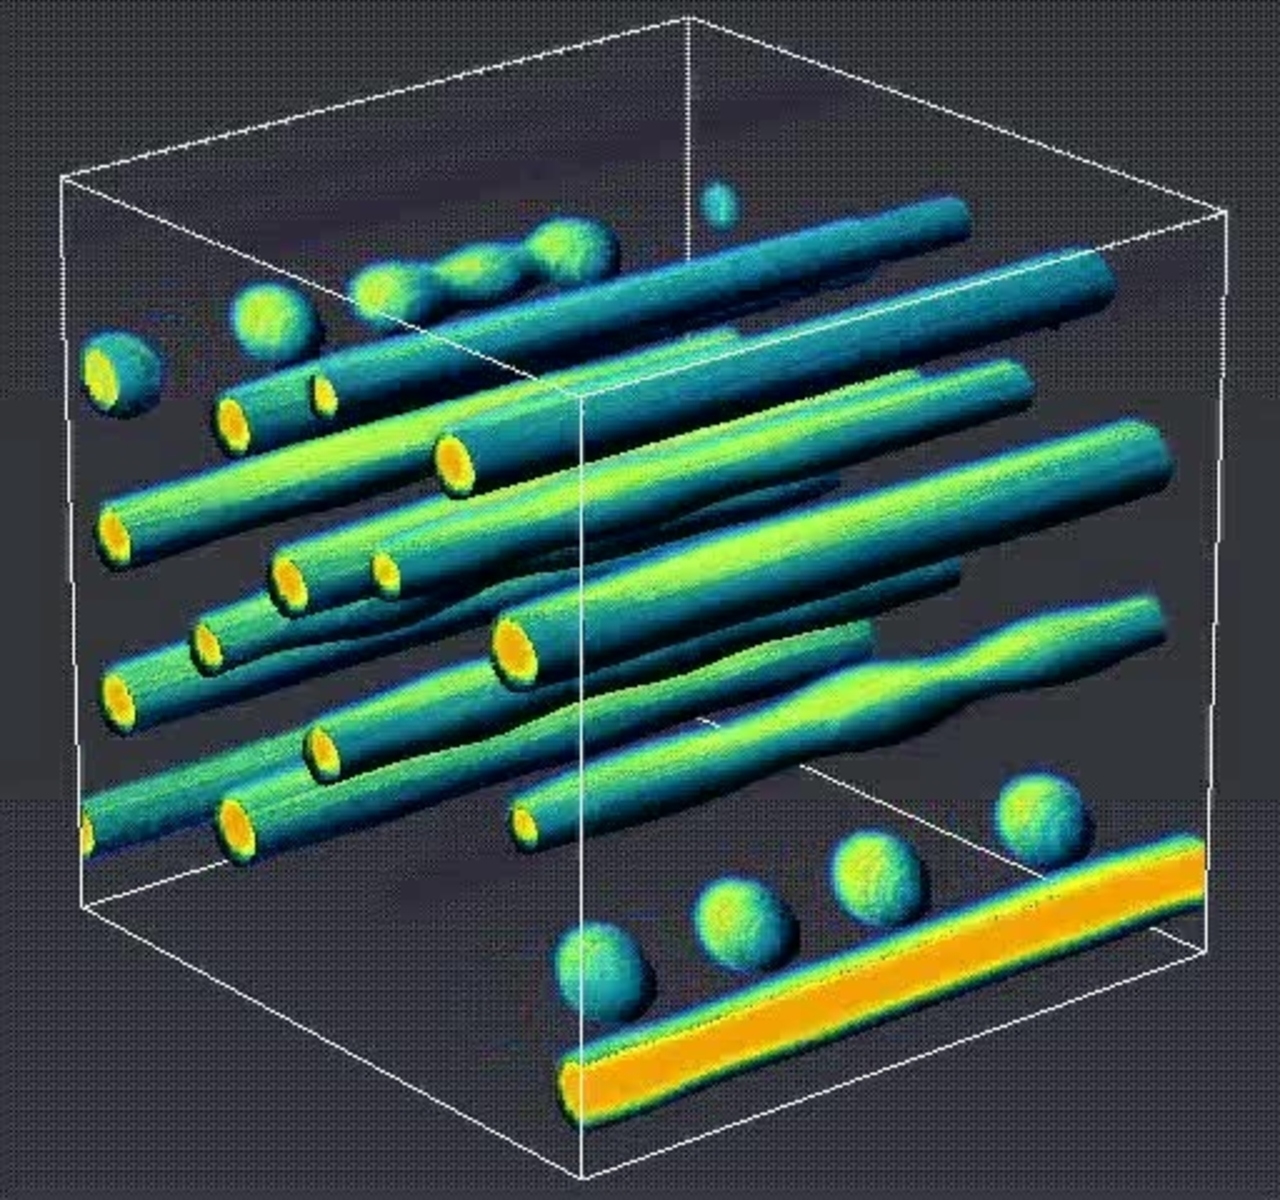 Phase Separation of a Two Component Fluid